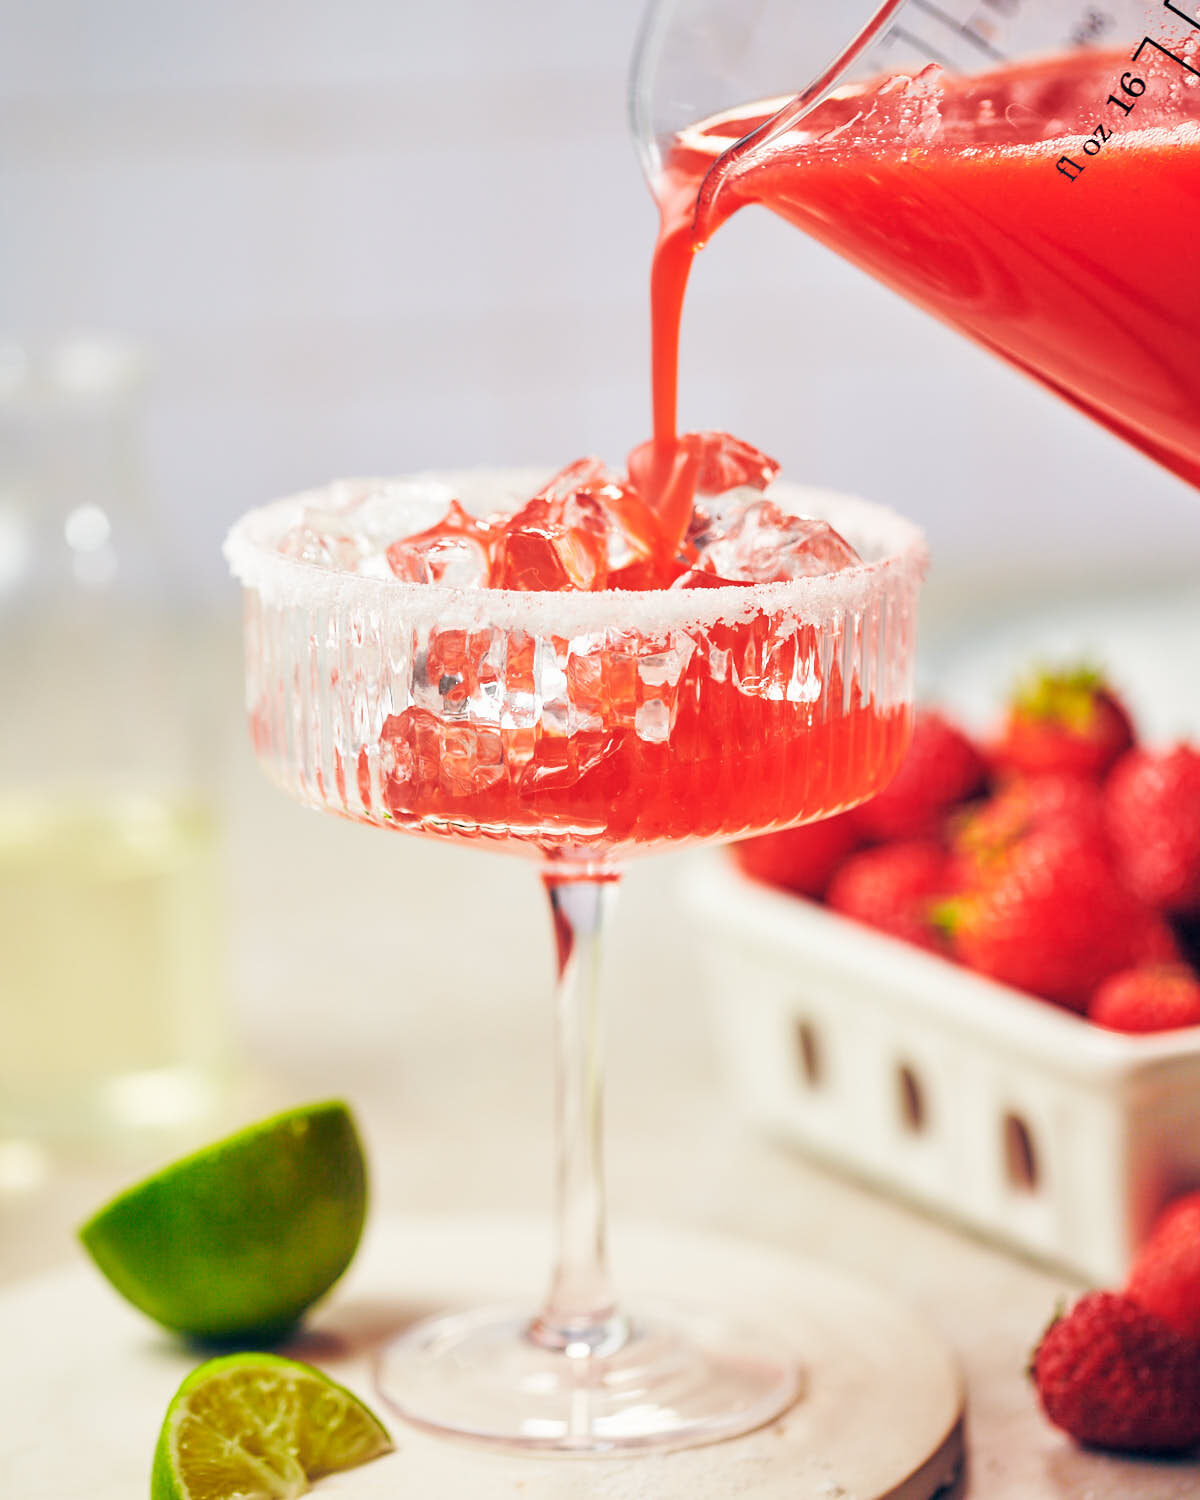 Pouring blended Strawberry Jalapeno Margarita over cocktail glass filled with ice.